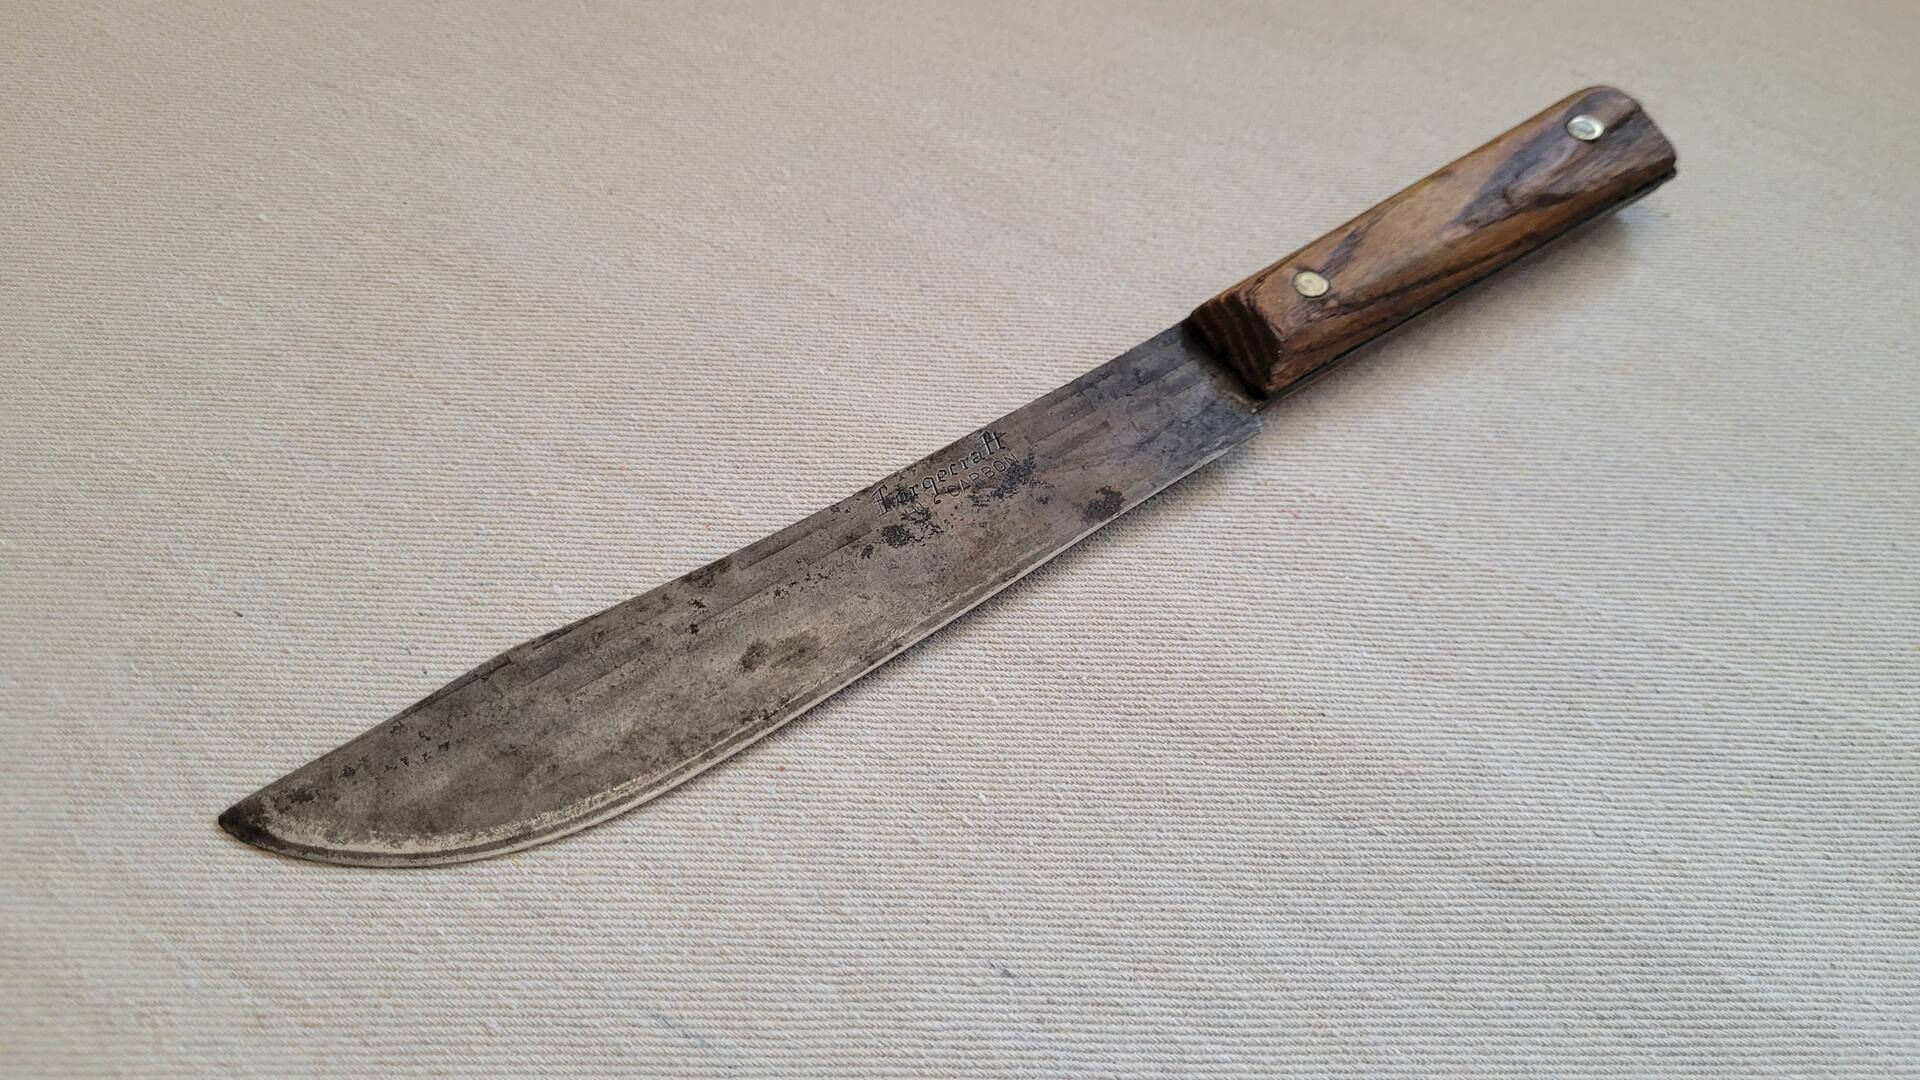 Beautiful vintage Forgecraft Hi-Carbon steel kitchen knife with hickory wood handle and brass rivets. Mid century made in USA collectible chef and butcher knives and cutlery